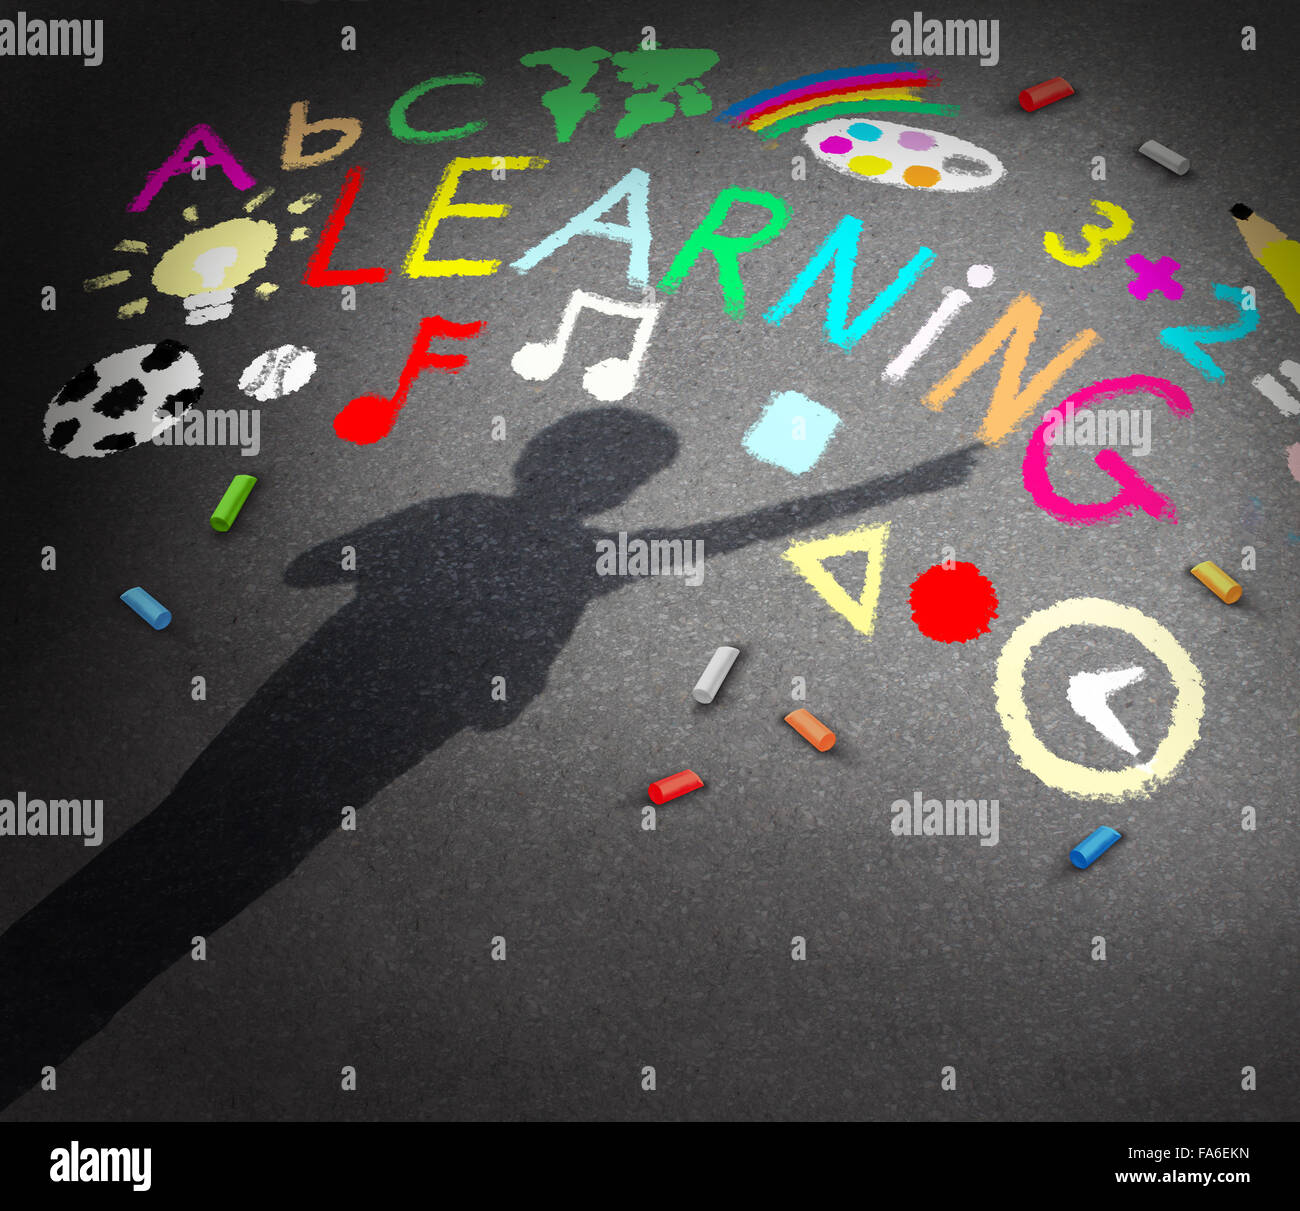 Child learning concept as the shadow of a young student on a schoolyard pavememt with chalk drawings of music math reading and art symbols as a metaphor for childhood creativity and the potential to learn and discover. Stock Photo